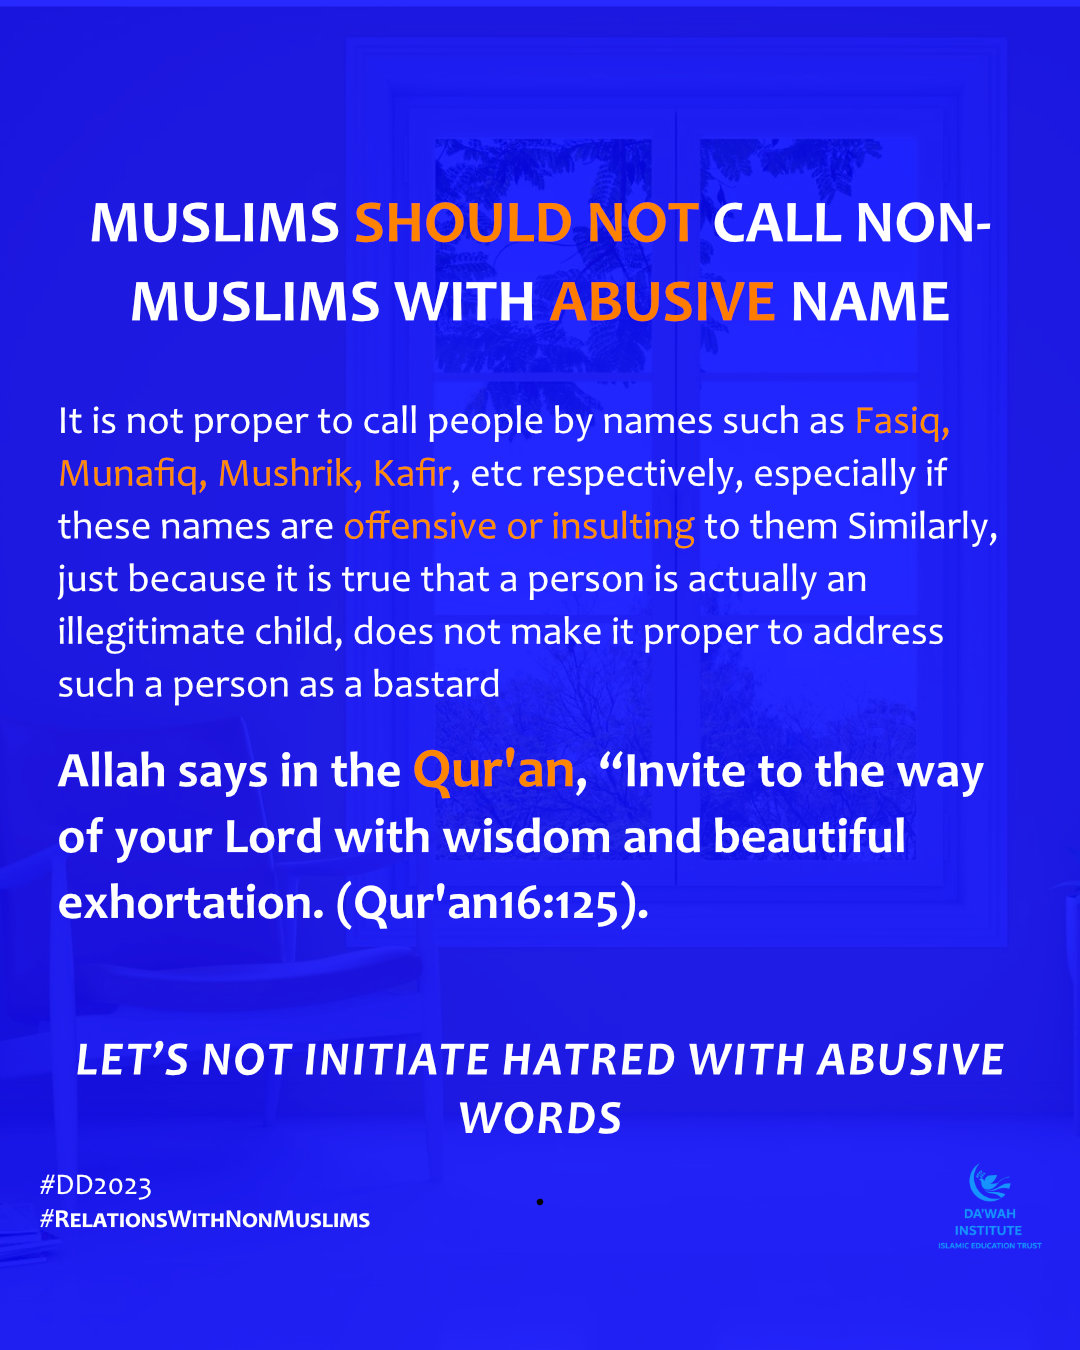 MUSLIMS SHOULD NOT CALL NON-MUSLIMS WITH ABUSIVE NAME